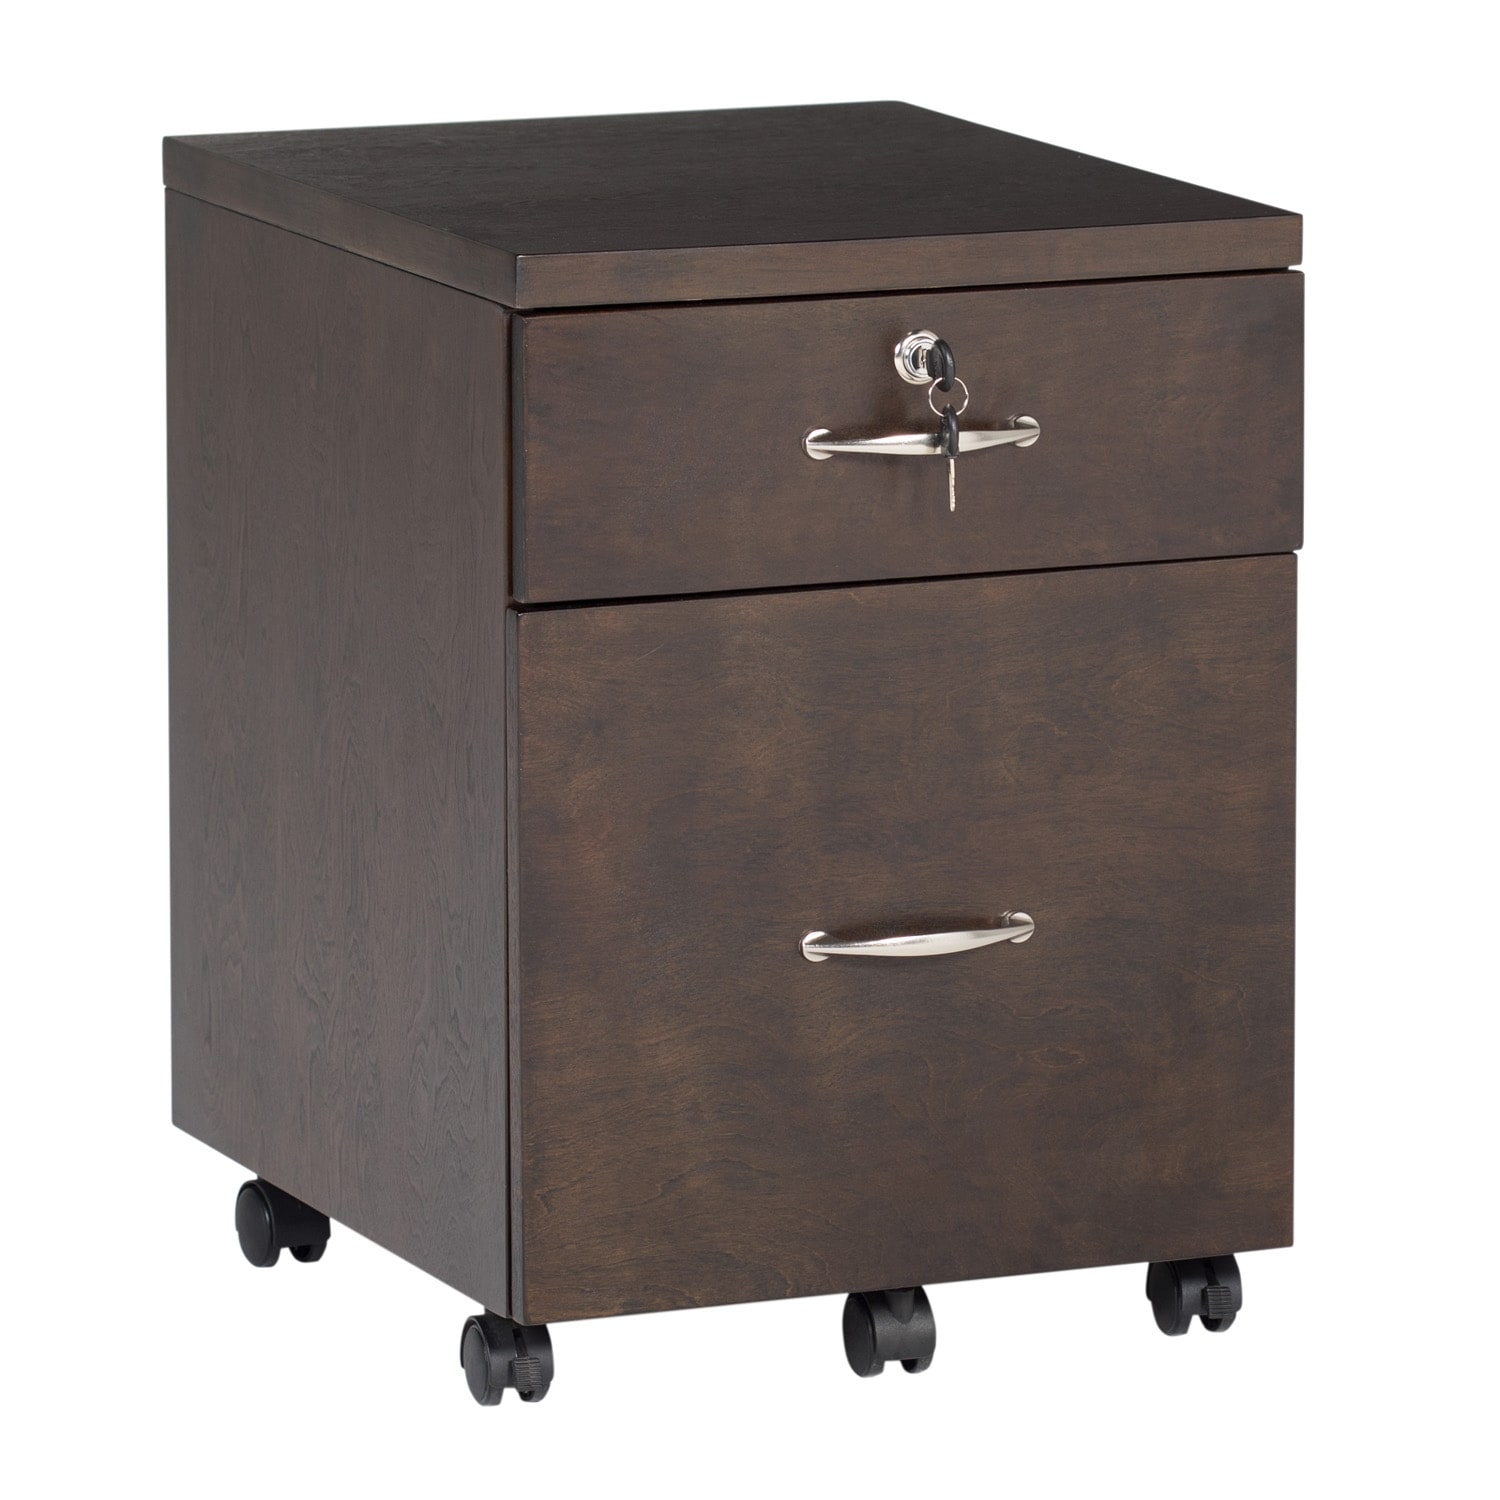 Shop Offex Newel Mobile 2 Drawer Wood Filing Cabinet With Lock